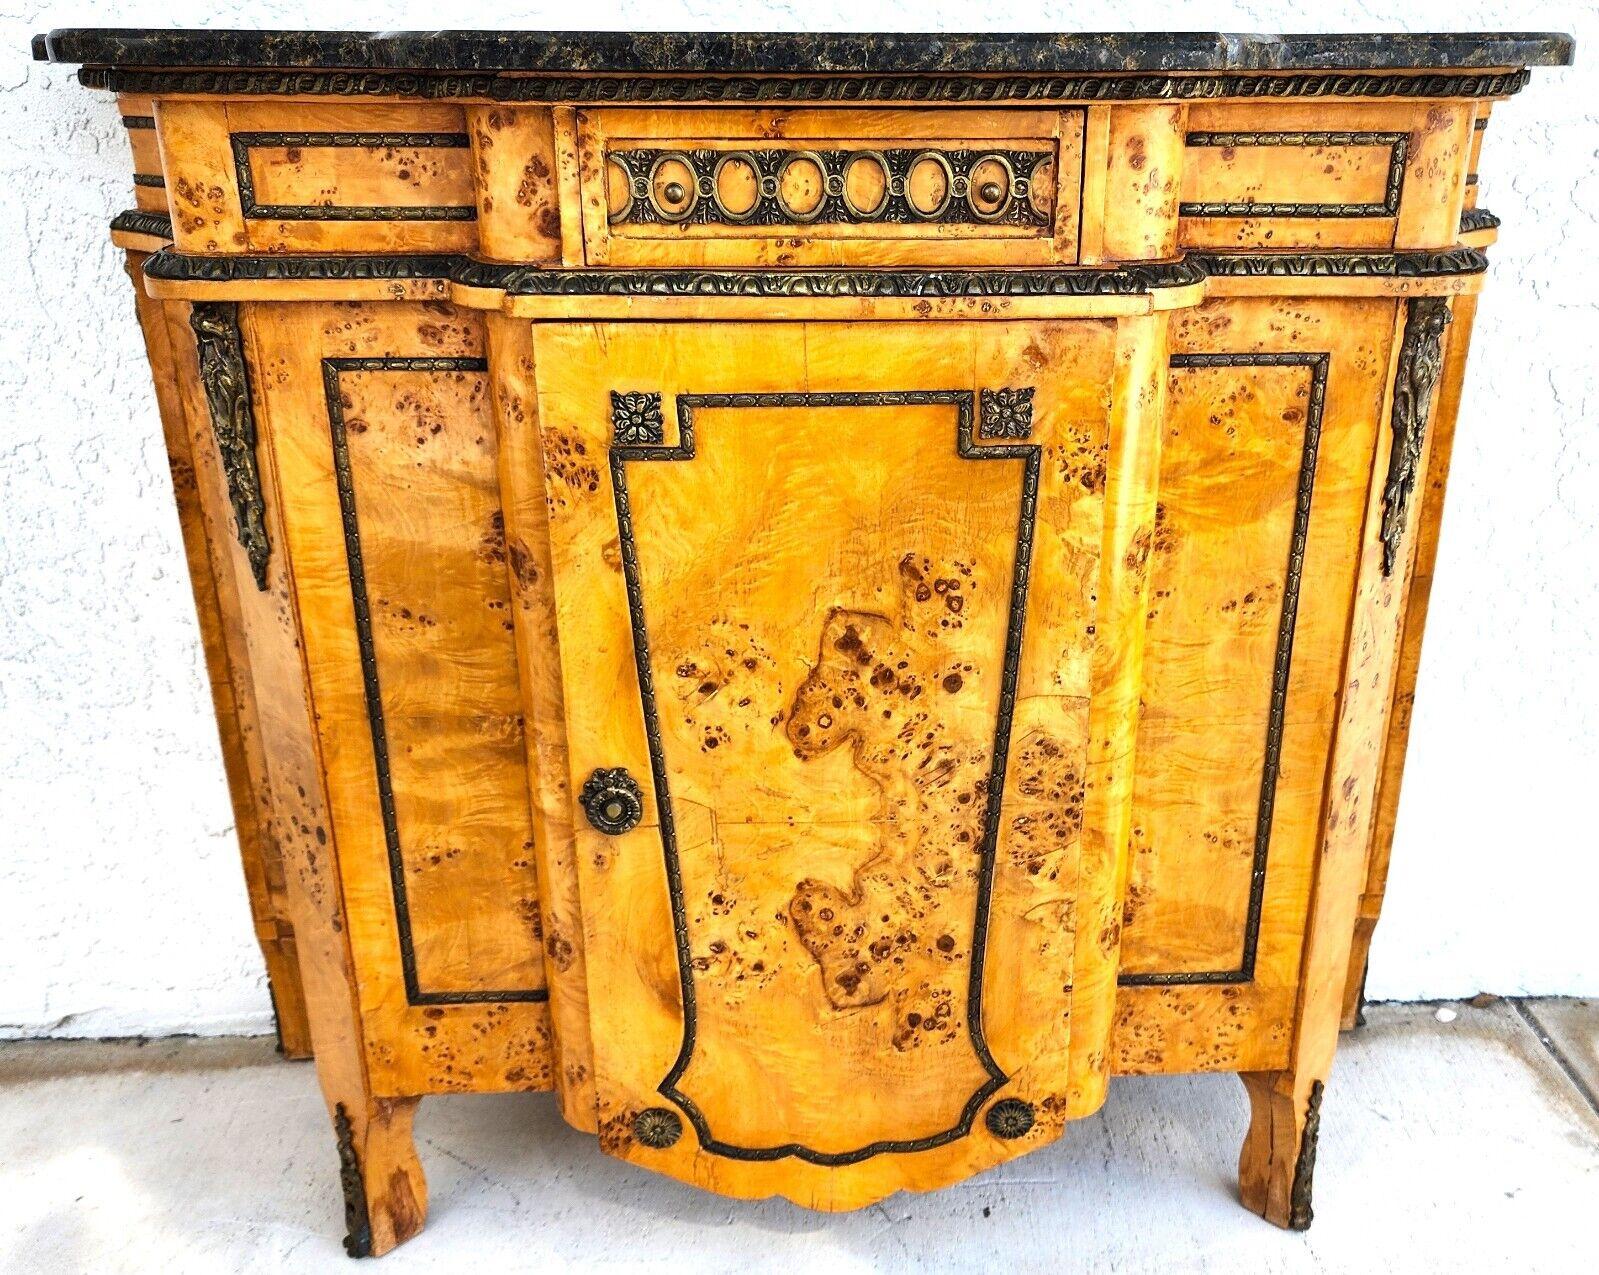 For FULL item description click on CONTINUE READING at the bottom of this page.

Offering One Of Our Recent Palm Beach Estate Fine Furniture Acquisitions Of A
French Louis XV Style Ormolu Birdseye Maple Wood Bar Cabinet
Featuring a Granite Stone